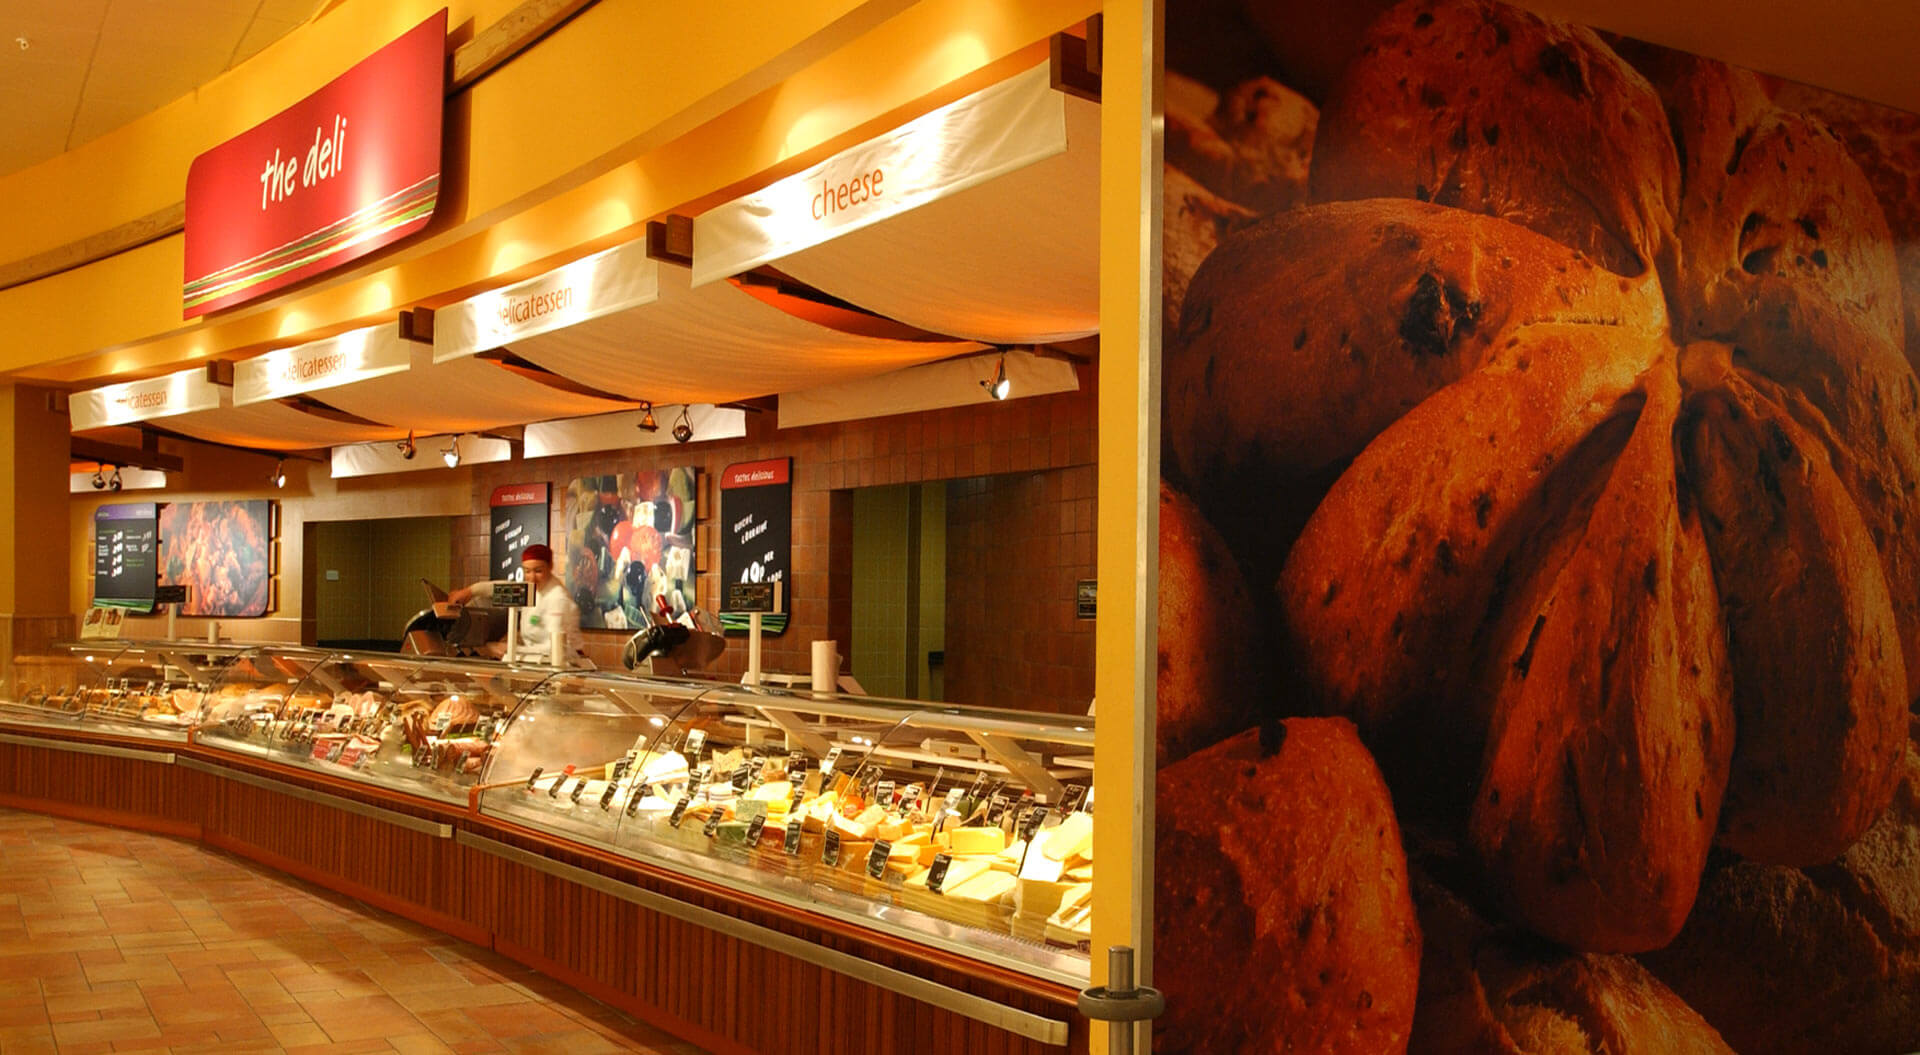 Safeway Mega store hypermarket deli with cheese, delicatessan and cold meats serve over counter